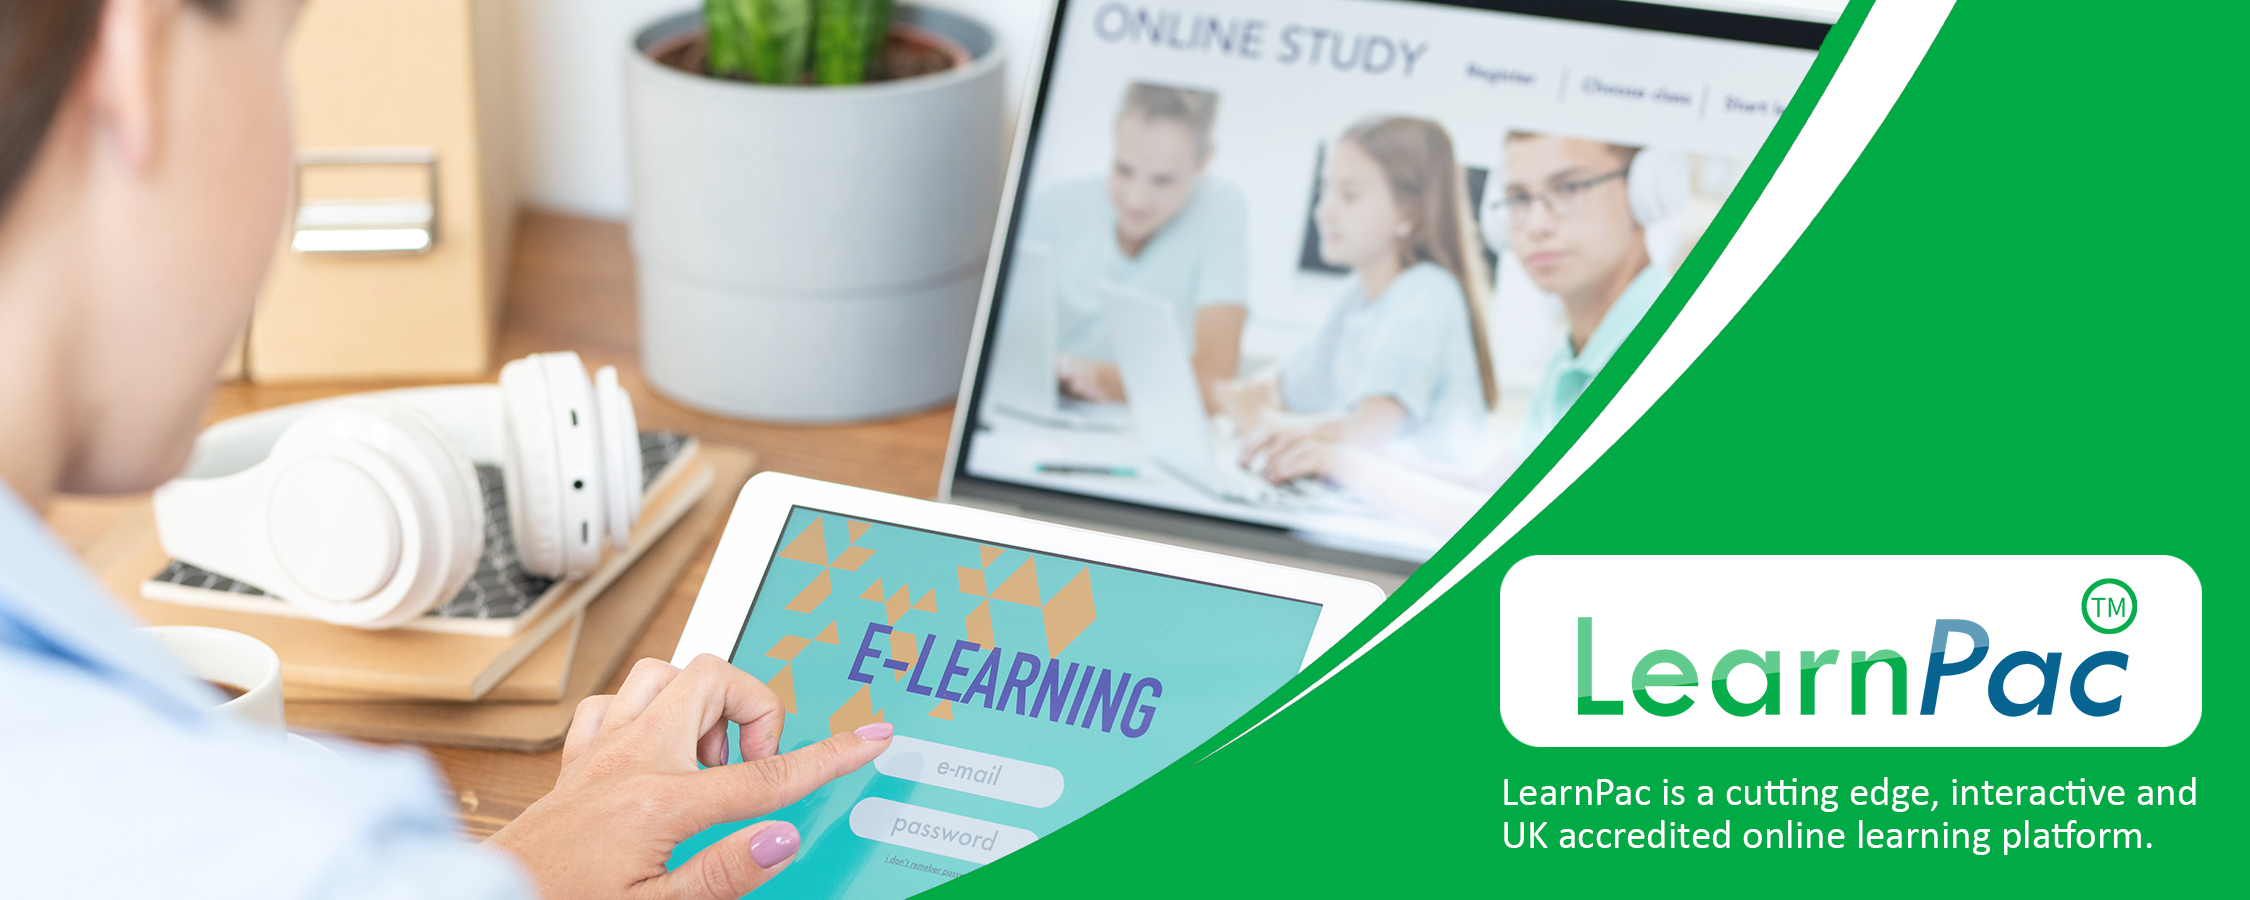 Creating a Mentally Healthy Work Environment - Level 1 - Online Learning Courses - E-Learning Courses - LearnPac Systems UK -